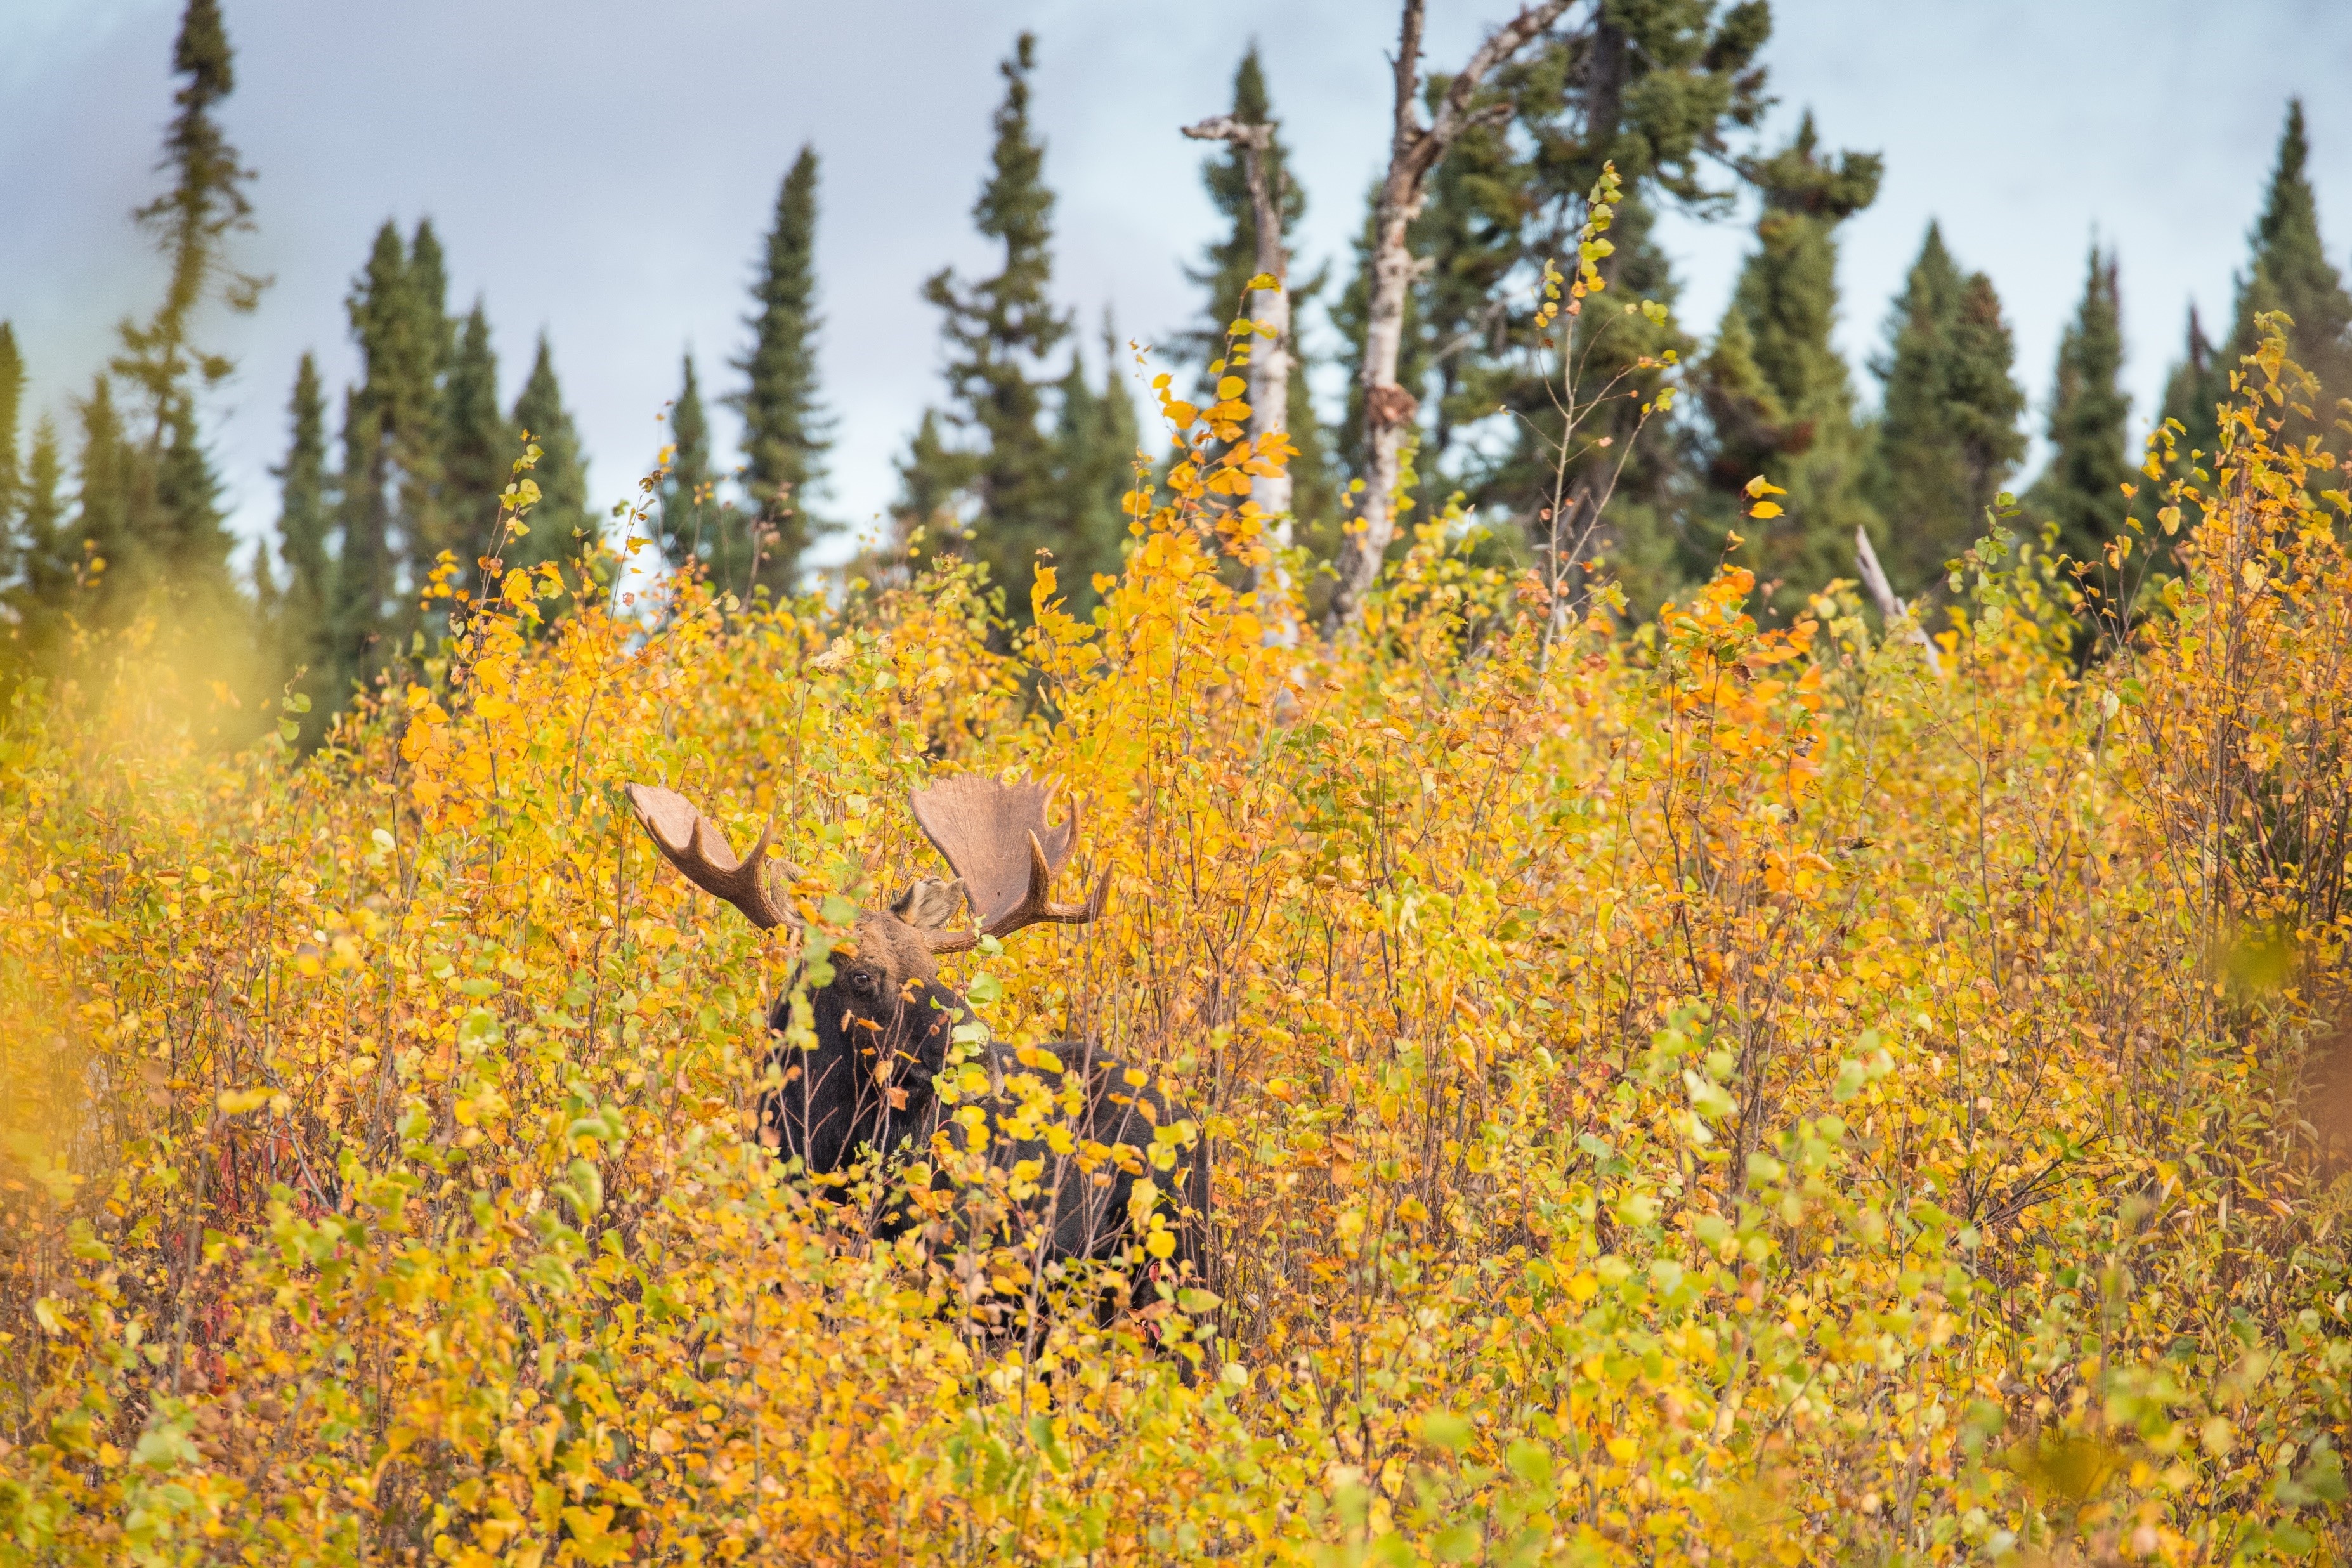 a moose in shrubbery